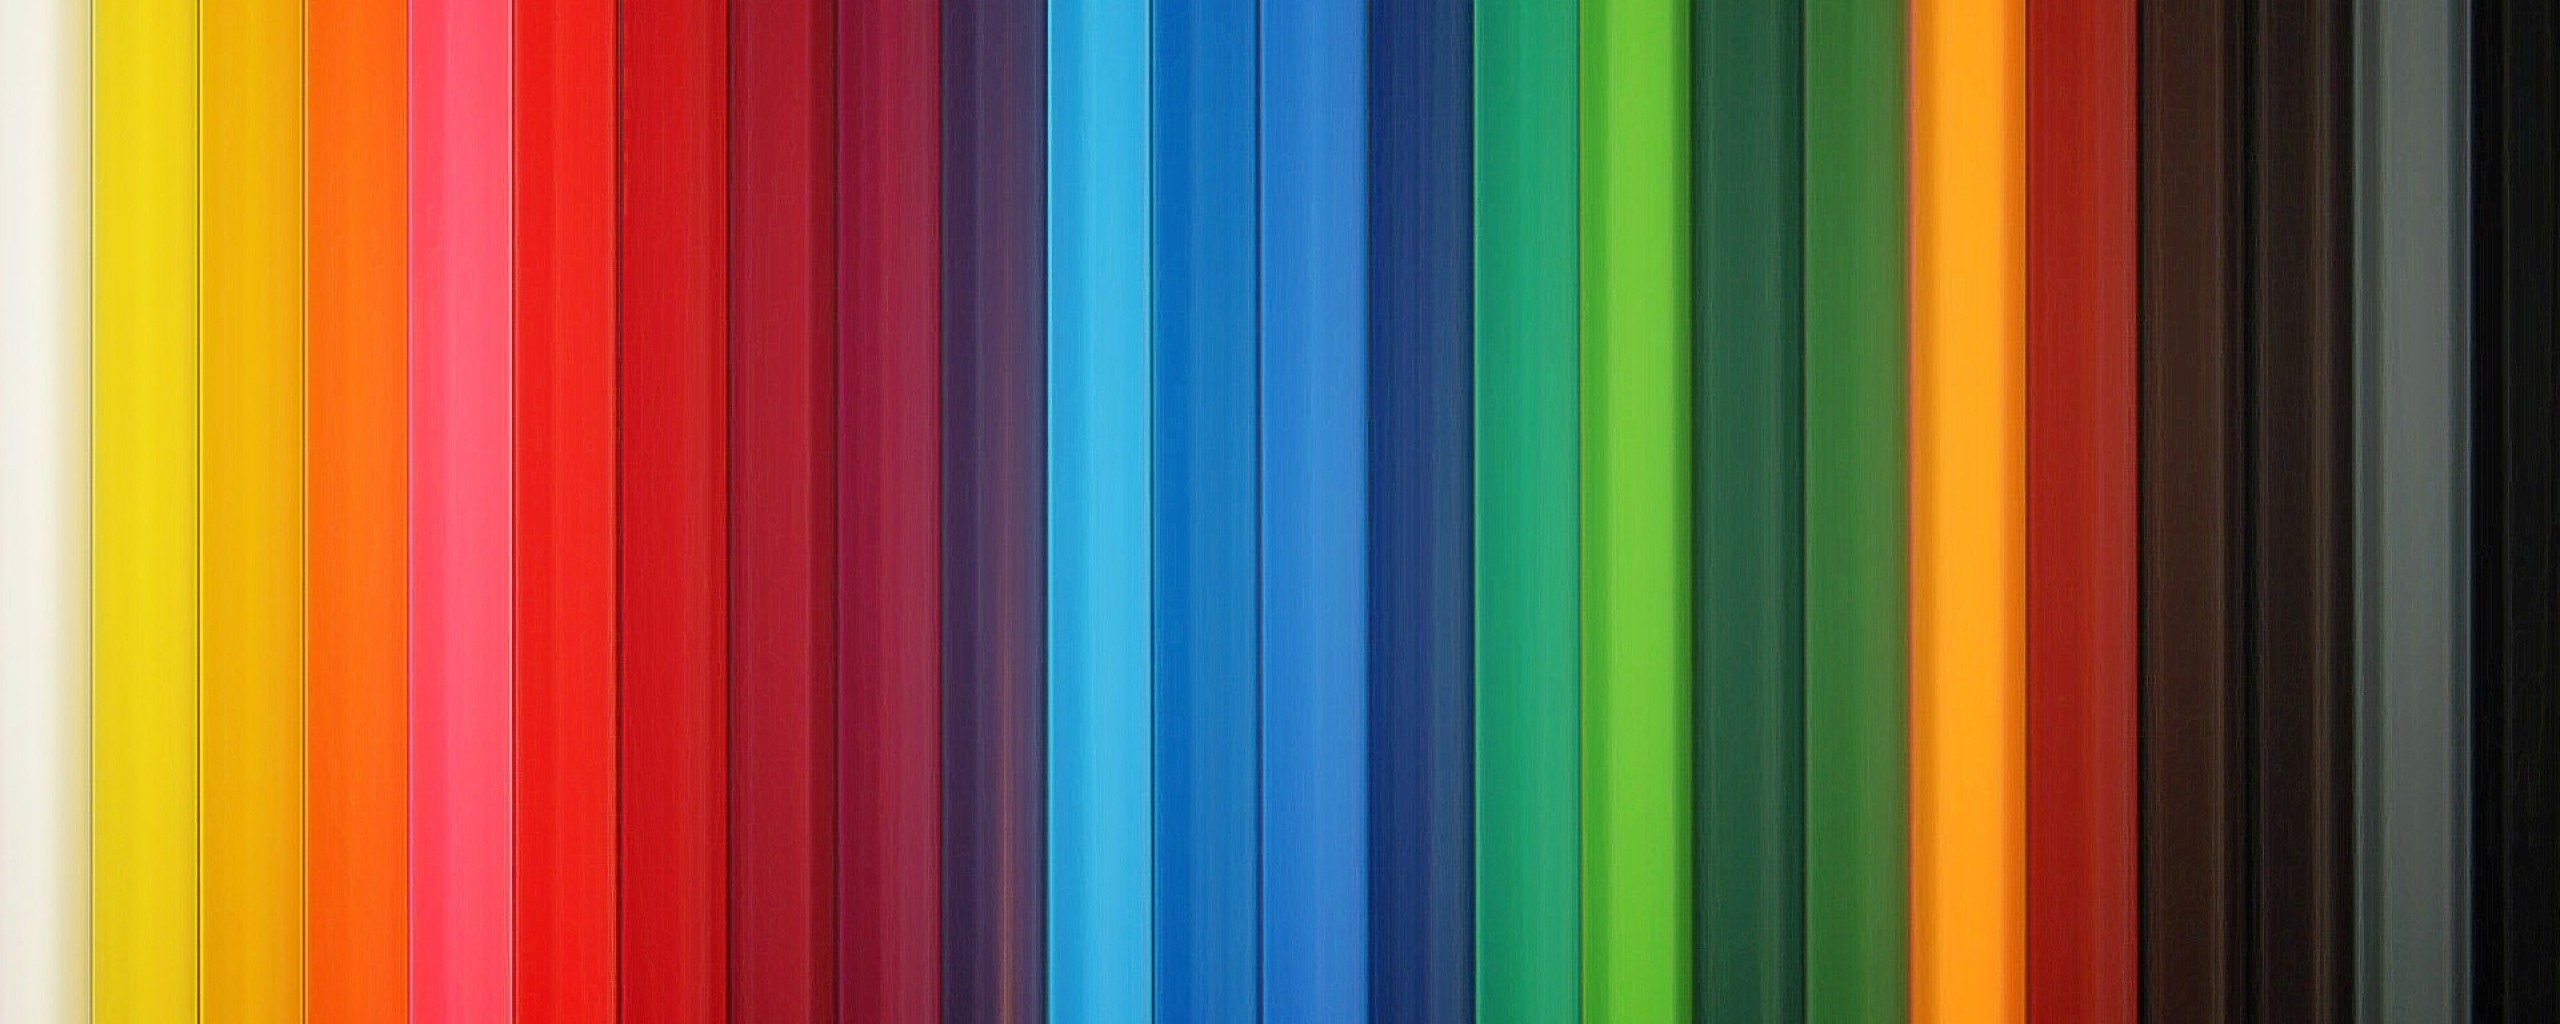 Wallpaper Colorful Stripes Rainbow Vertical Dual Monitor